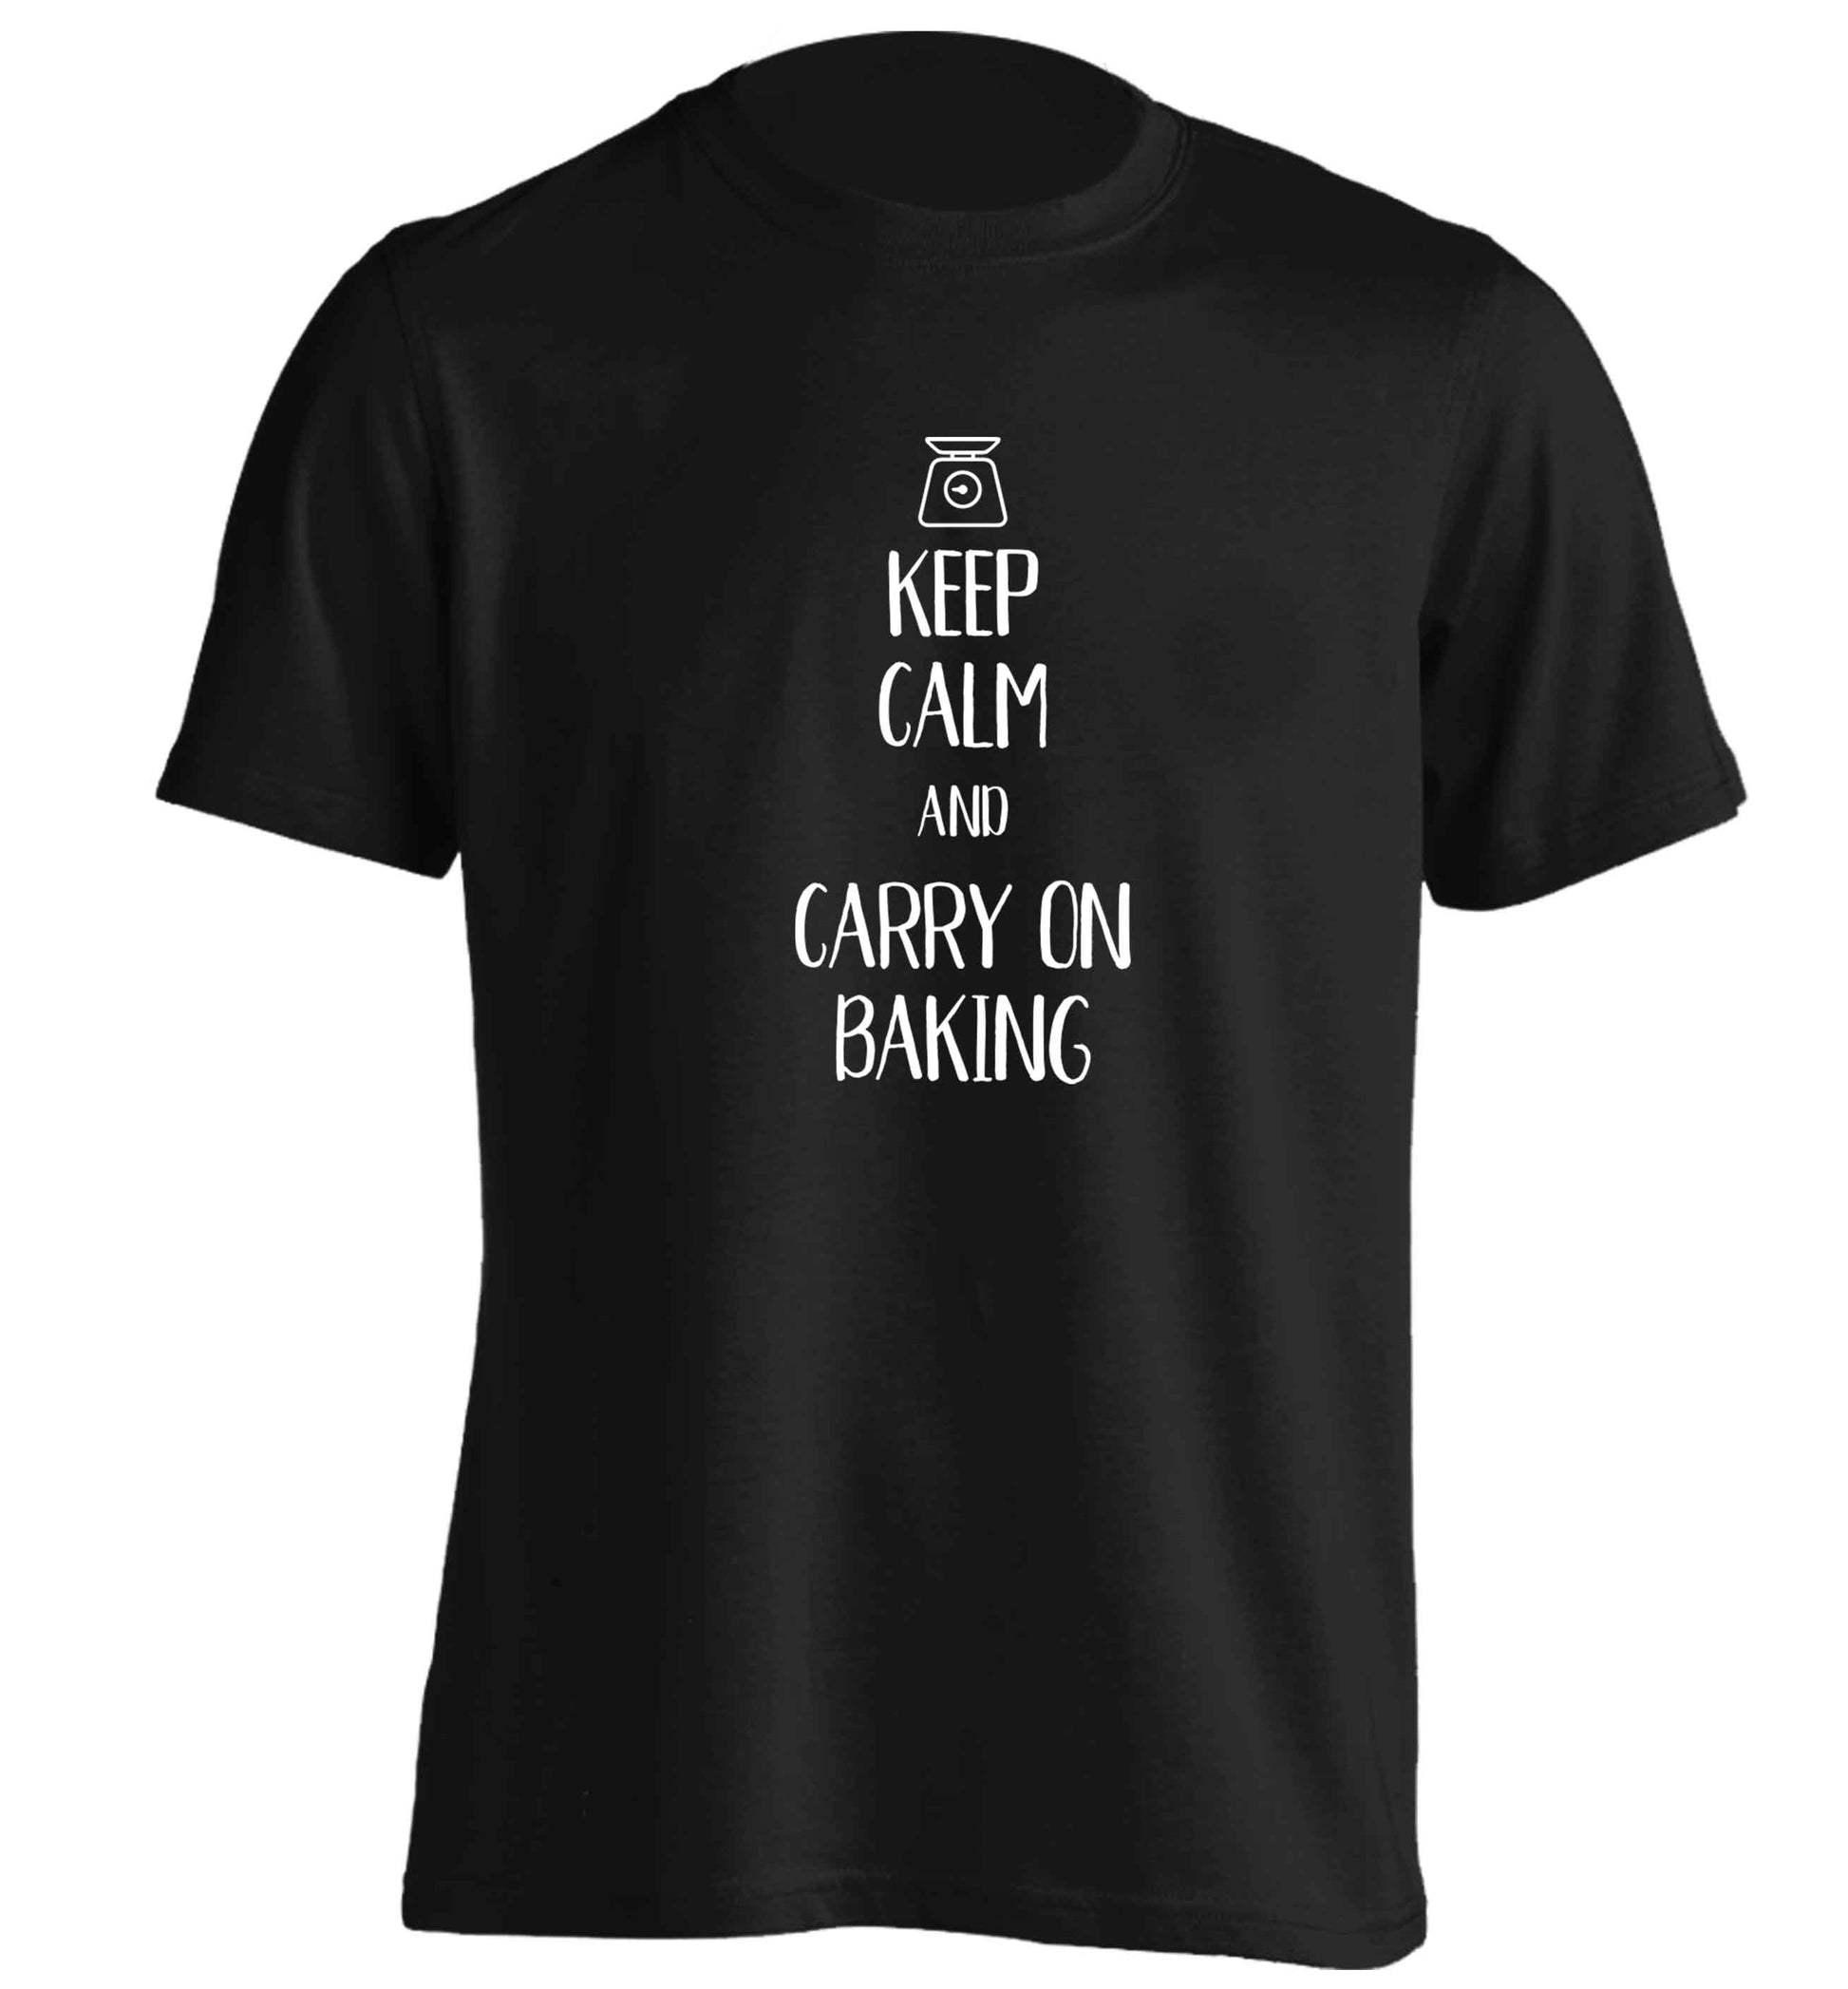 Keep calm and carry on baking adults unisex black Tshirt 2XL